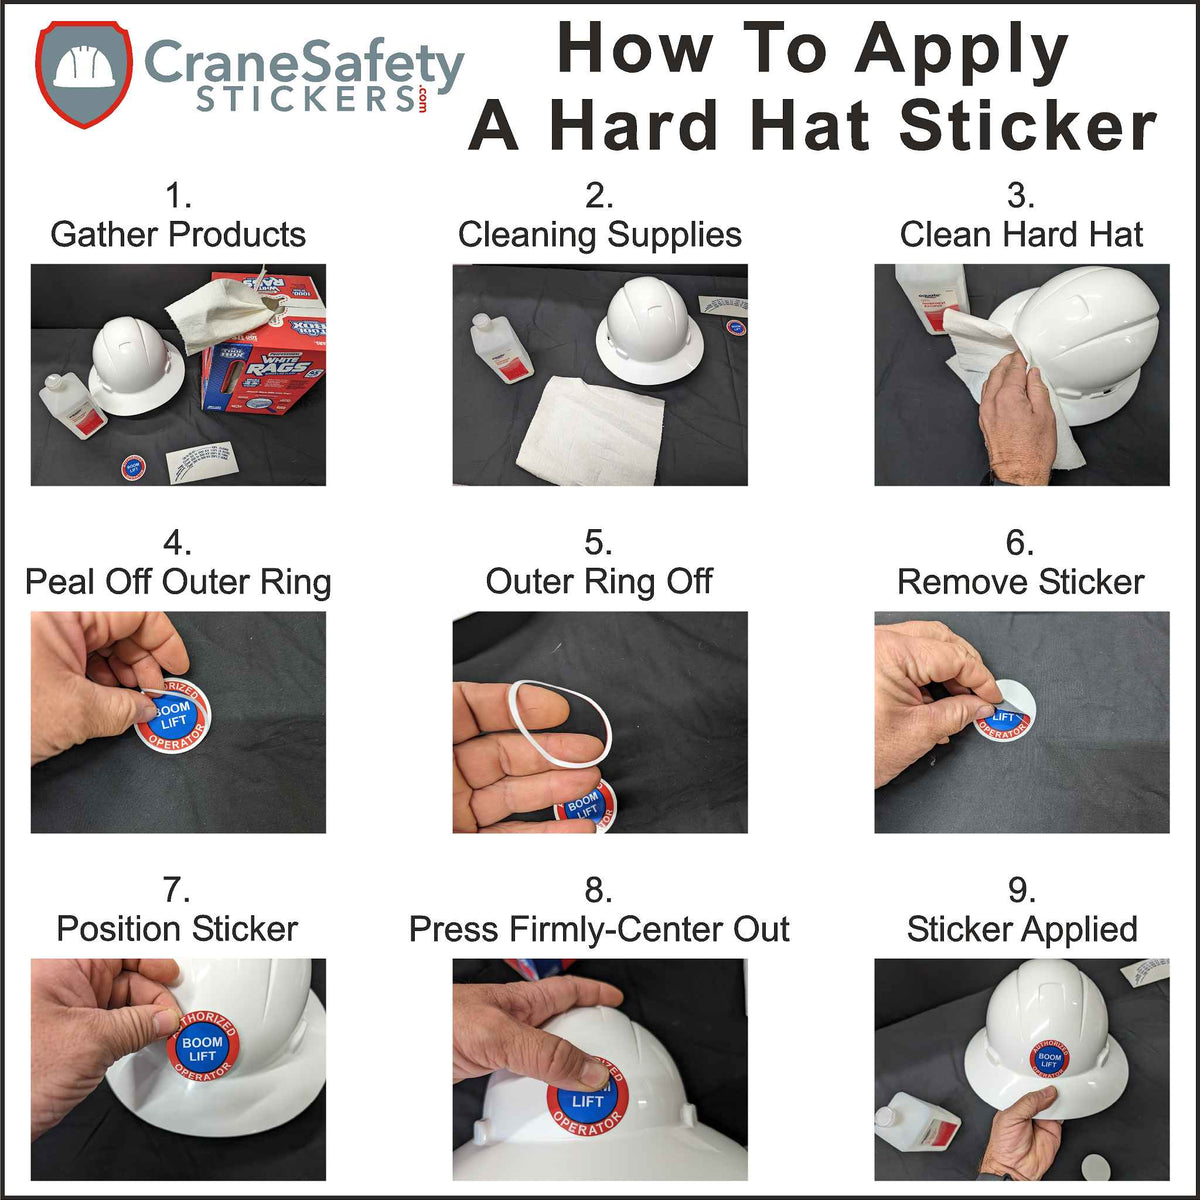 How To Apply A How to apply Our Think Safety Work Safely Hard Hat Sticker To A Hard Hat.